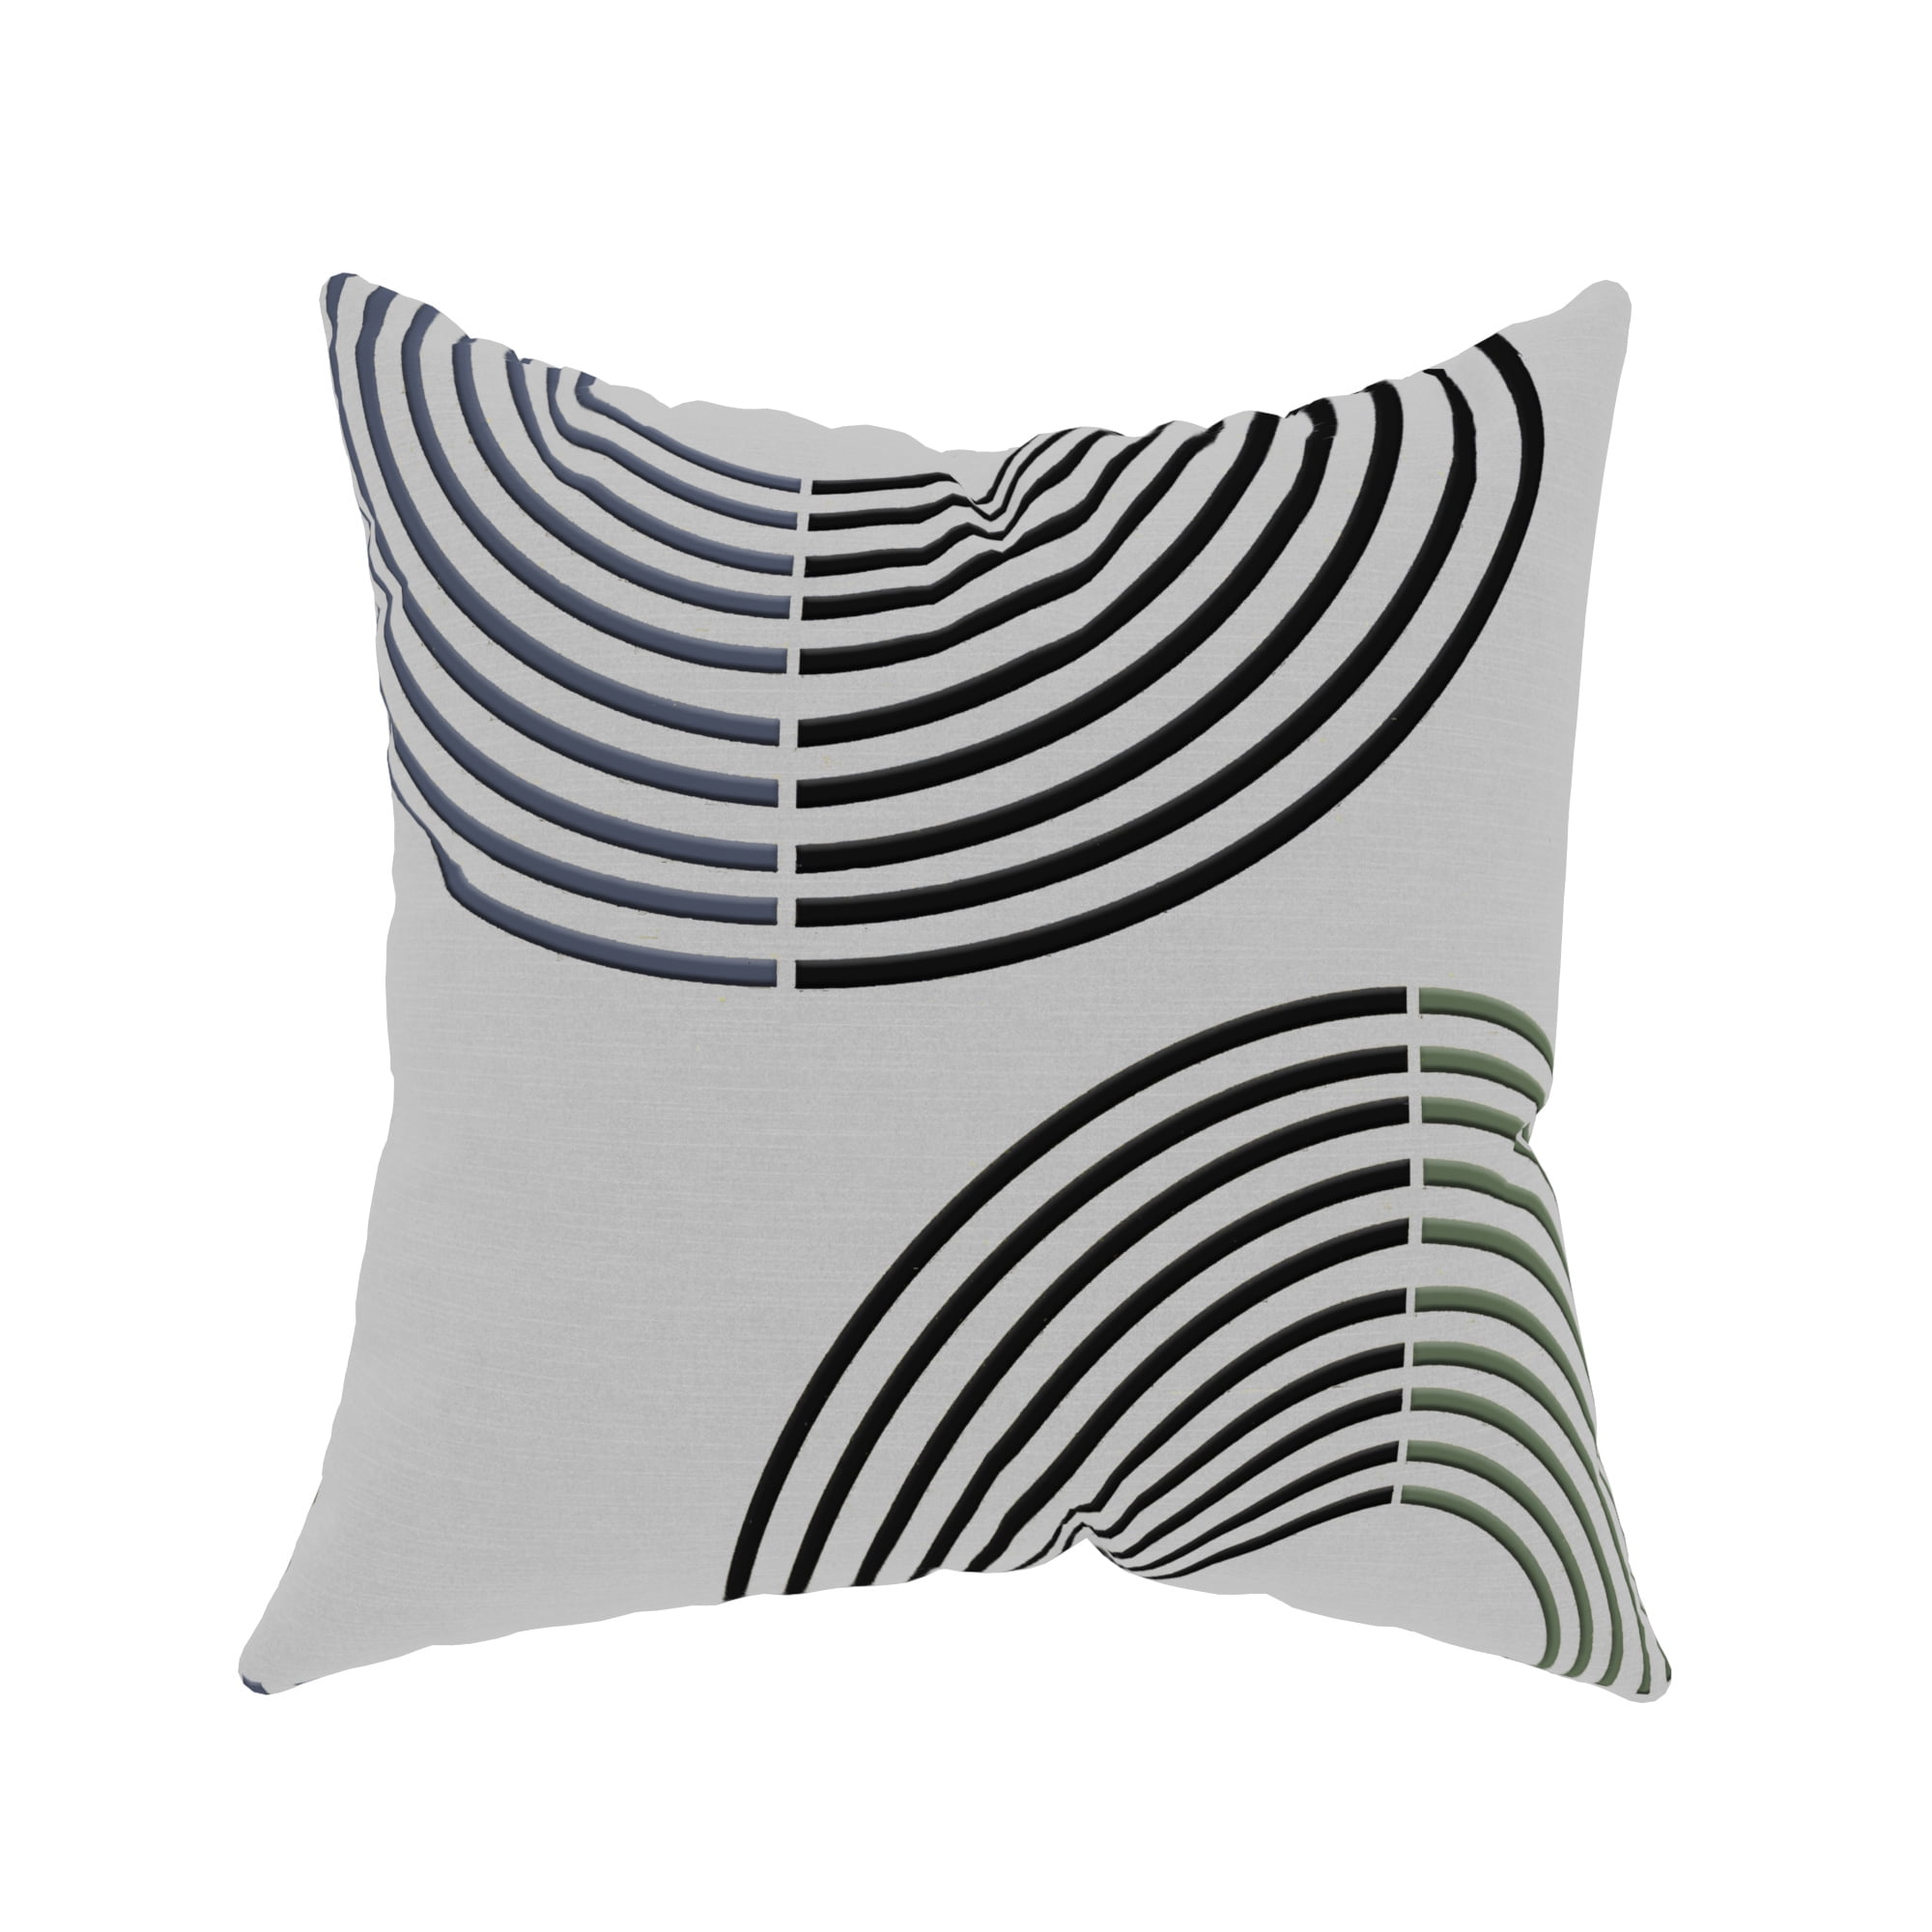 New Fashion Yellow Gray Geometric Pattern Pillow Case Home Office Cushion Cover 